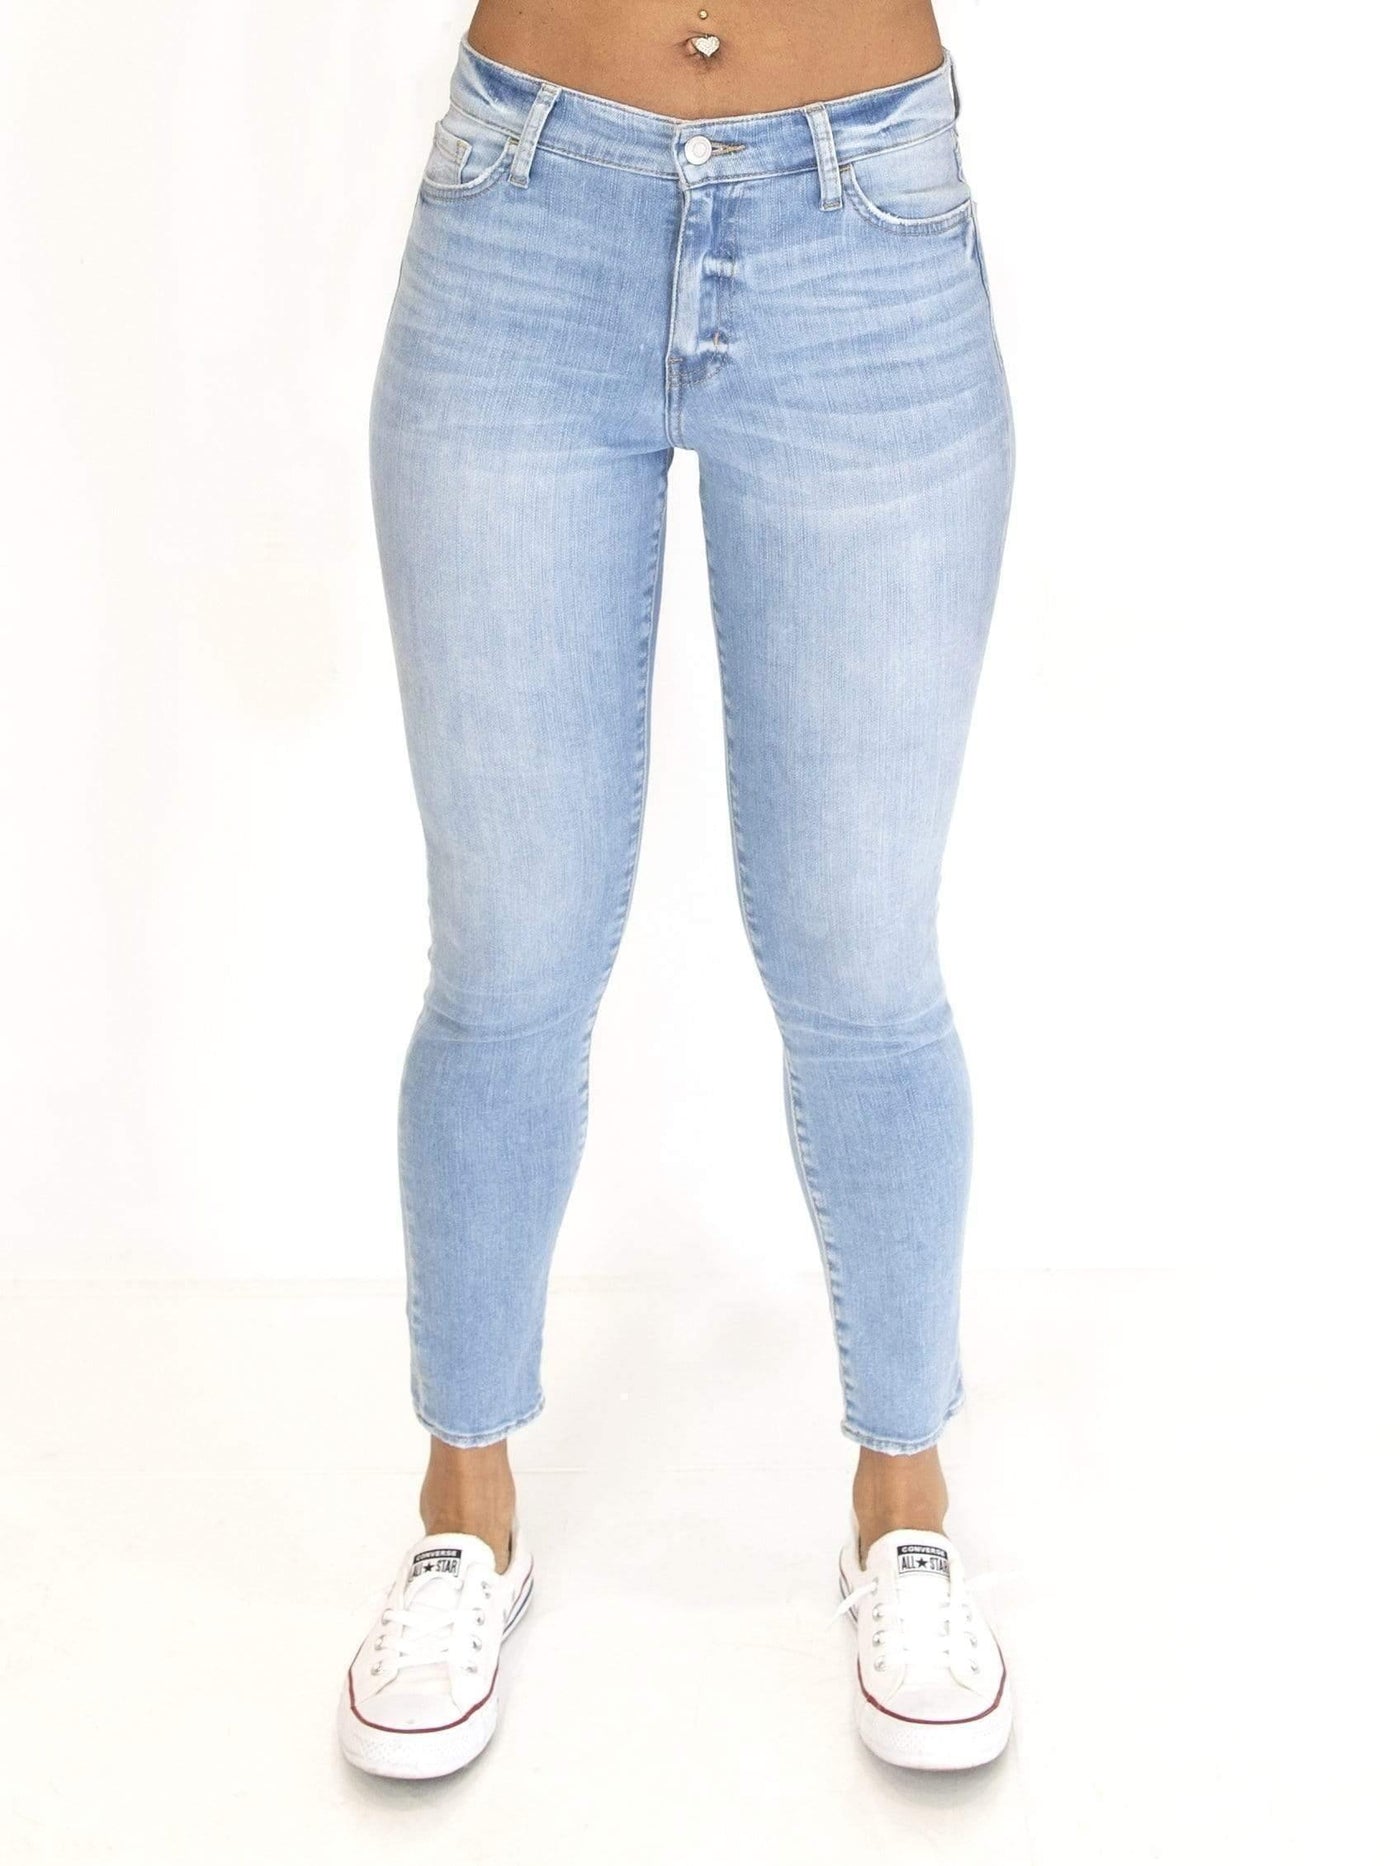 Torn | Stretch Fray Jeans - Statement Piece NY basic, Blue, Brooklyn Boutique, casual, chic, Fall, jeans, Light wash denim, Long Pants, Misses, mom jeans, not clearance, Ships from USA, skinny fit, skinny pants, SPNY Exclusive, statement, statement piece, Statement Piece Boutique, statement piece ny, Statement Pieces, Statement Pieces Boutique, Women's Boutique Statement Bottoms